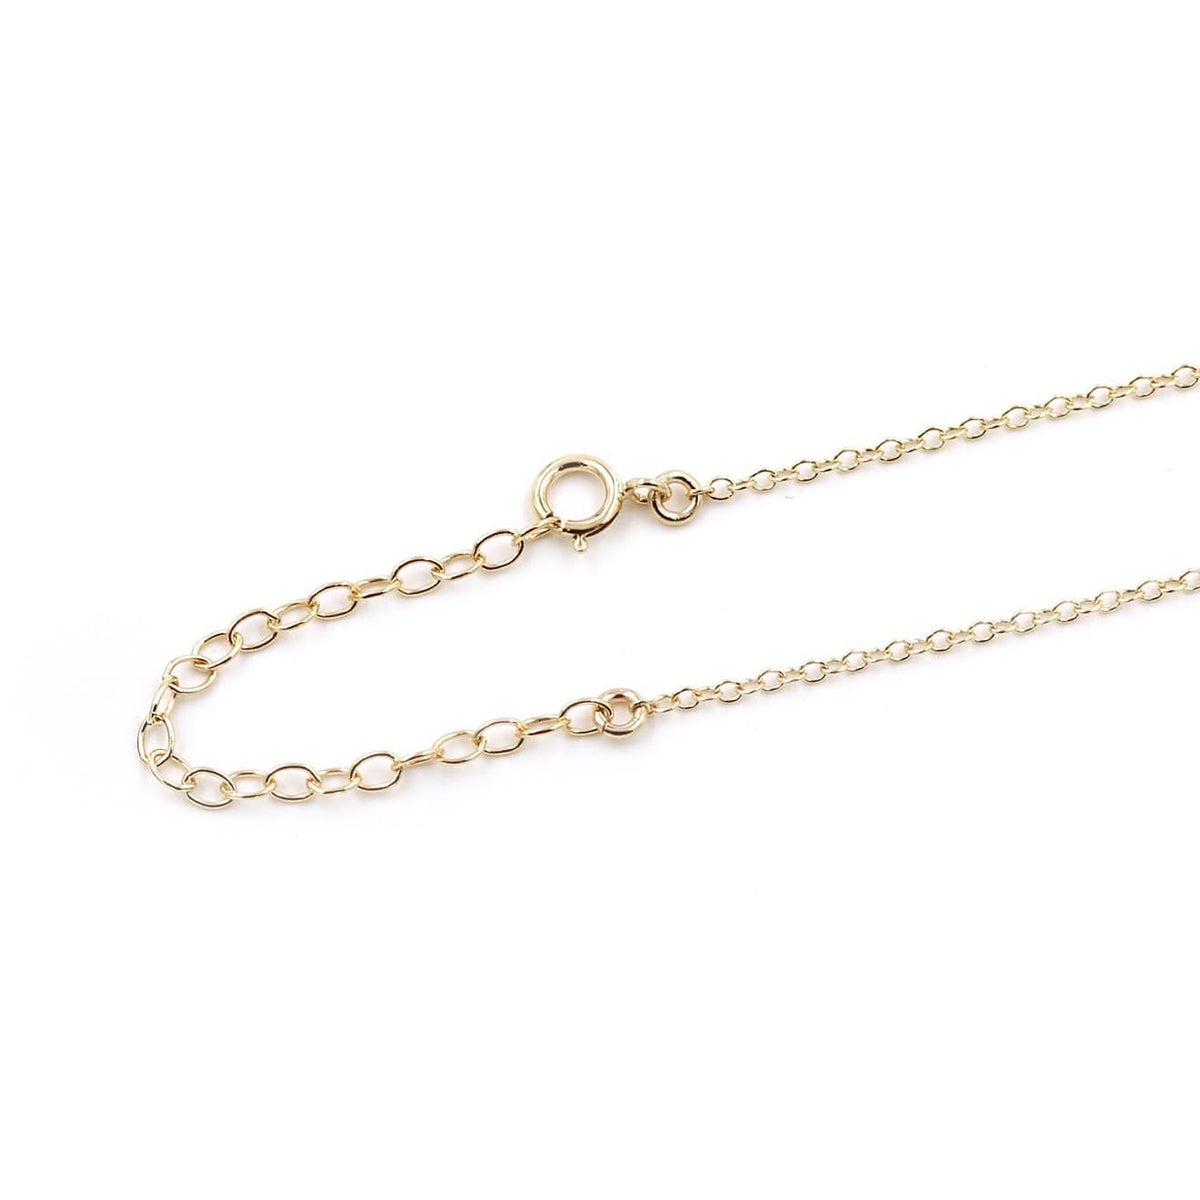 Close up of MaeMae 14k Gold Necklace Chain Extender and Clasp.